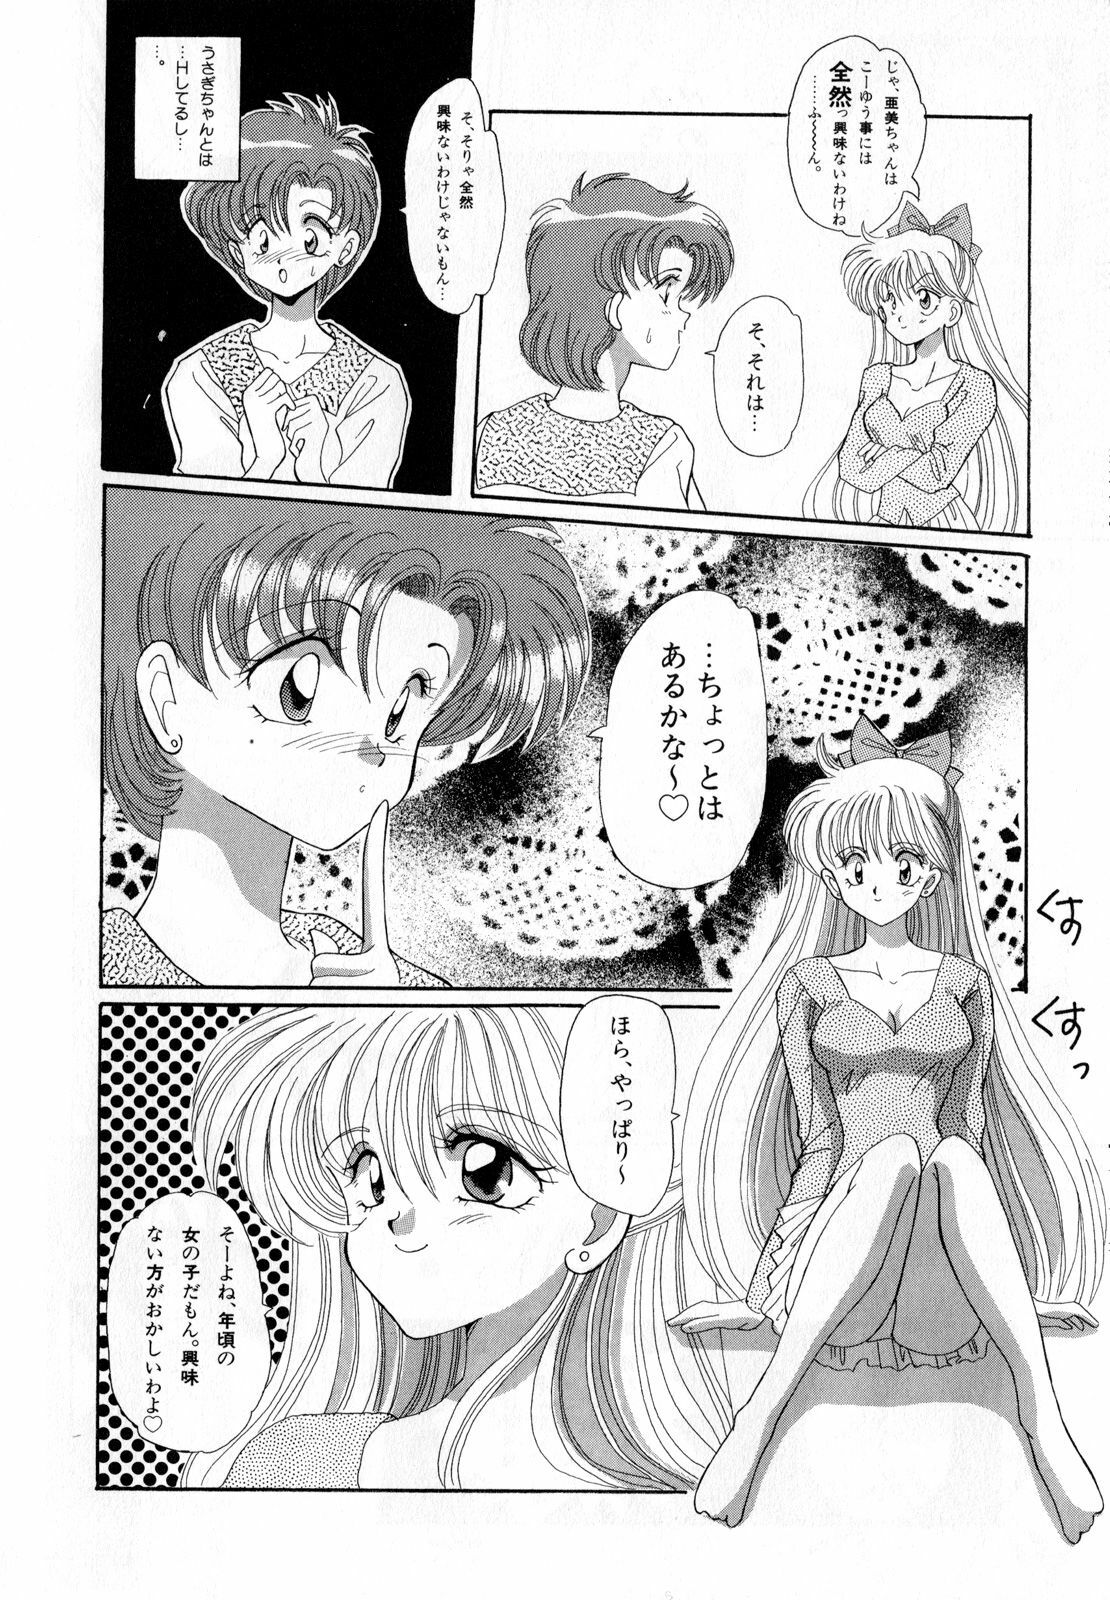 [Anthology] Lunatic Party 3 (Sailor Moon) page 45 full